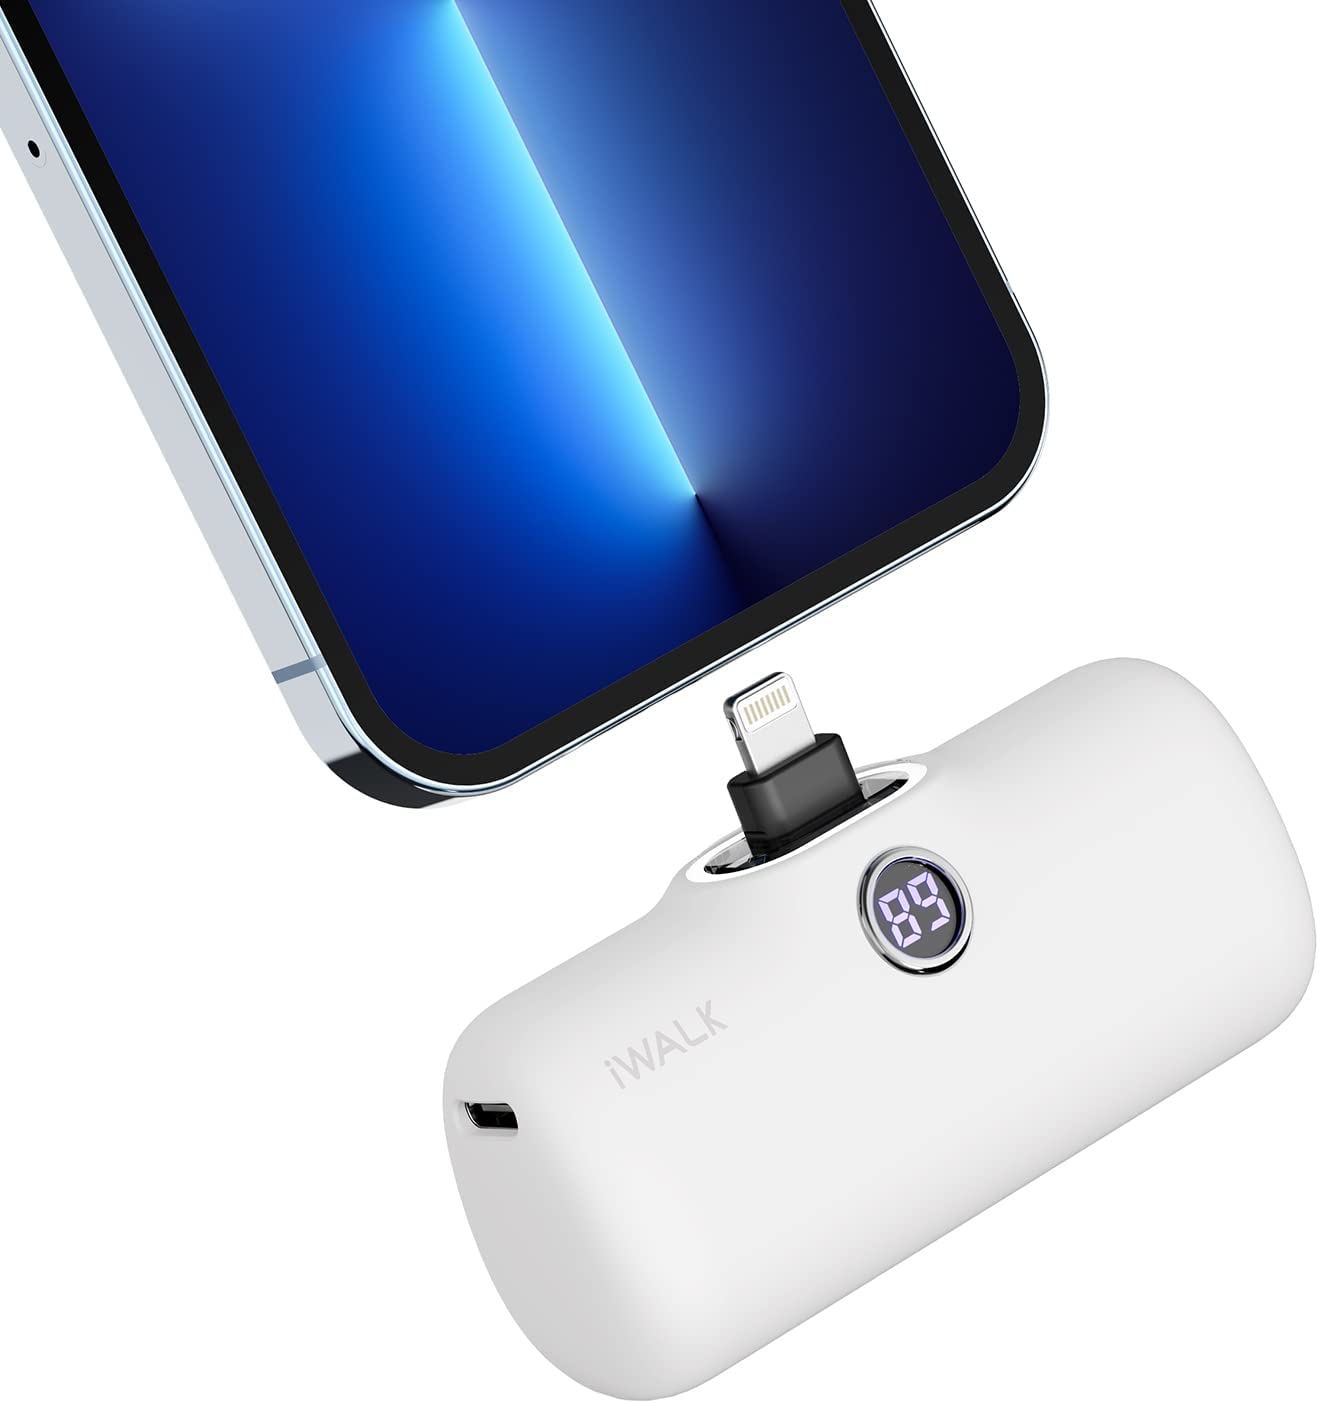 iWALK LinkPod Pro Portable Charger for Mother's Day